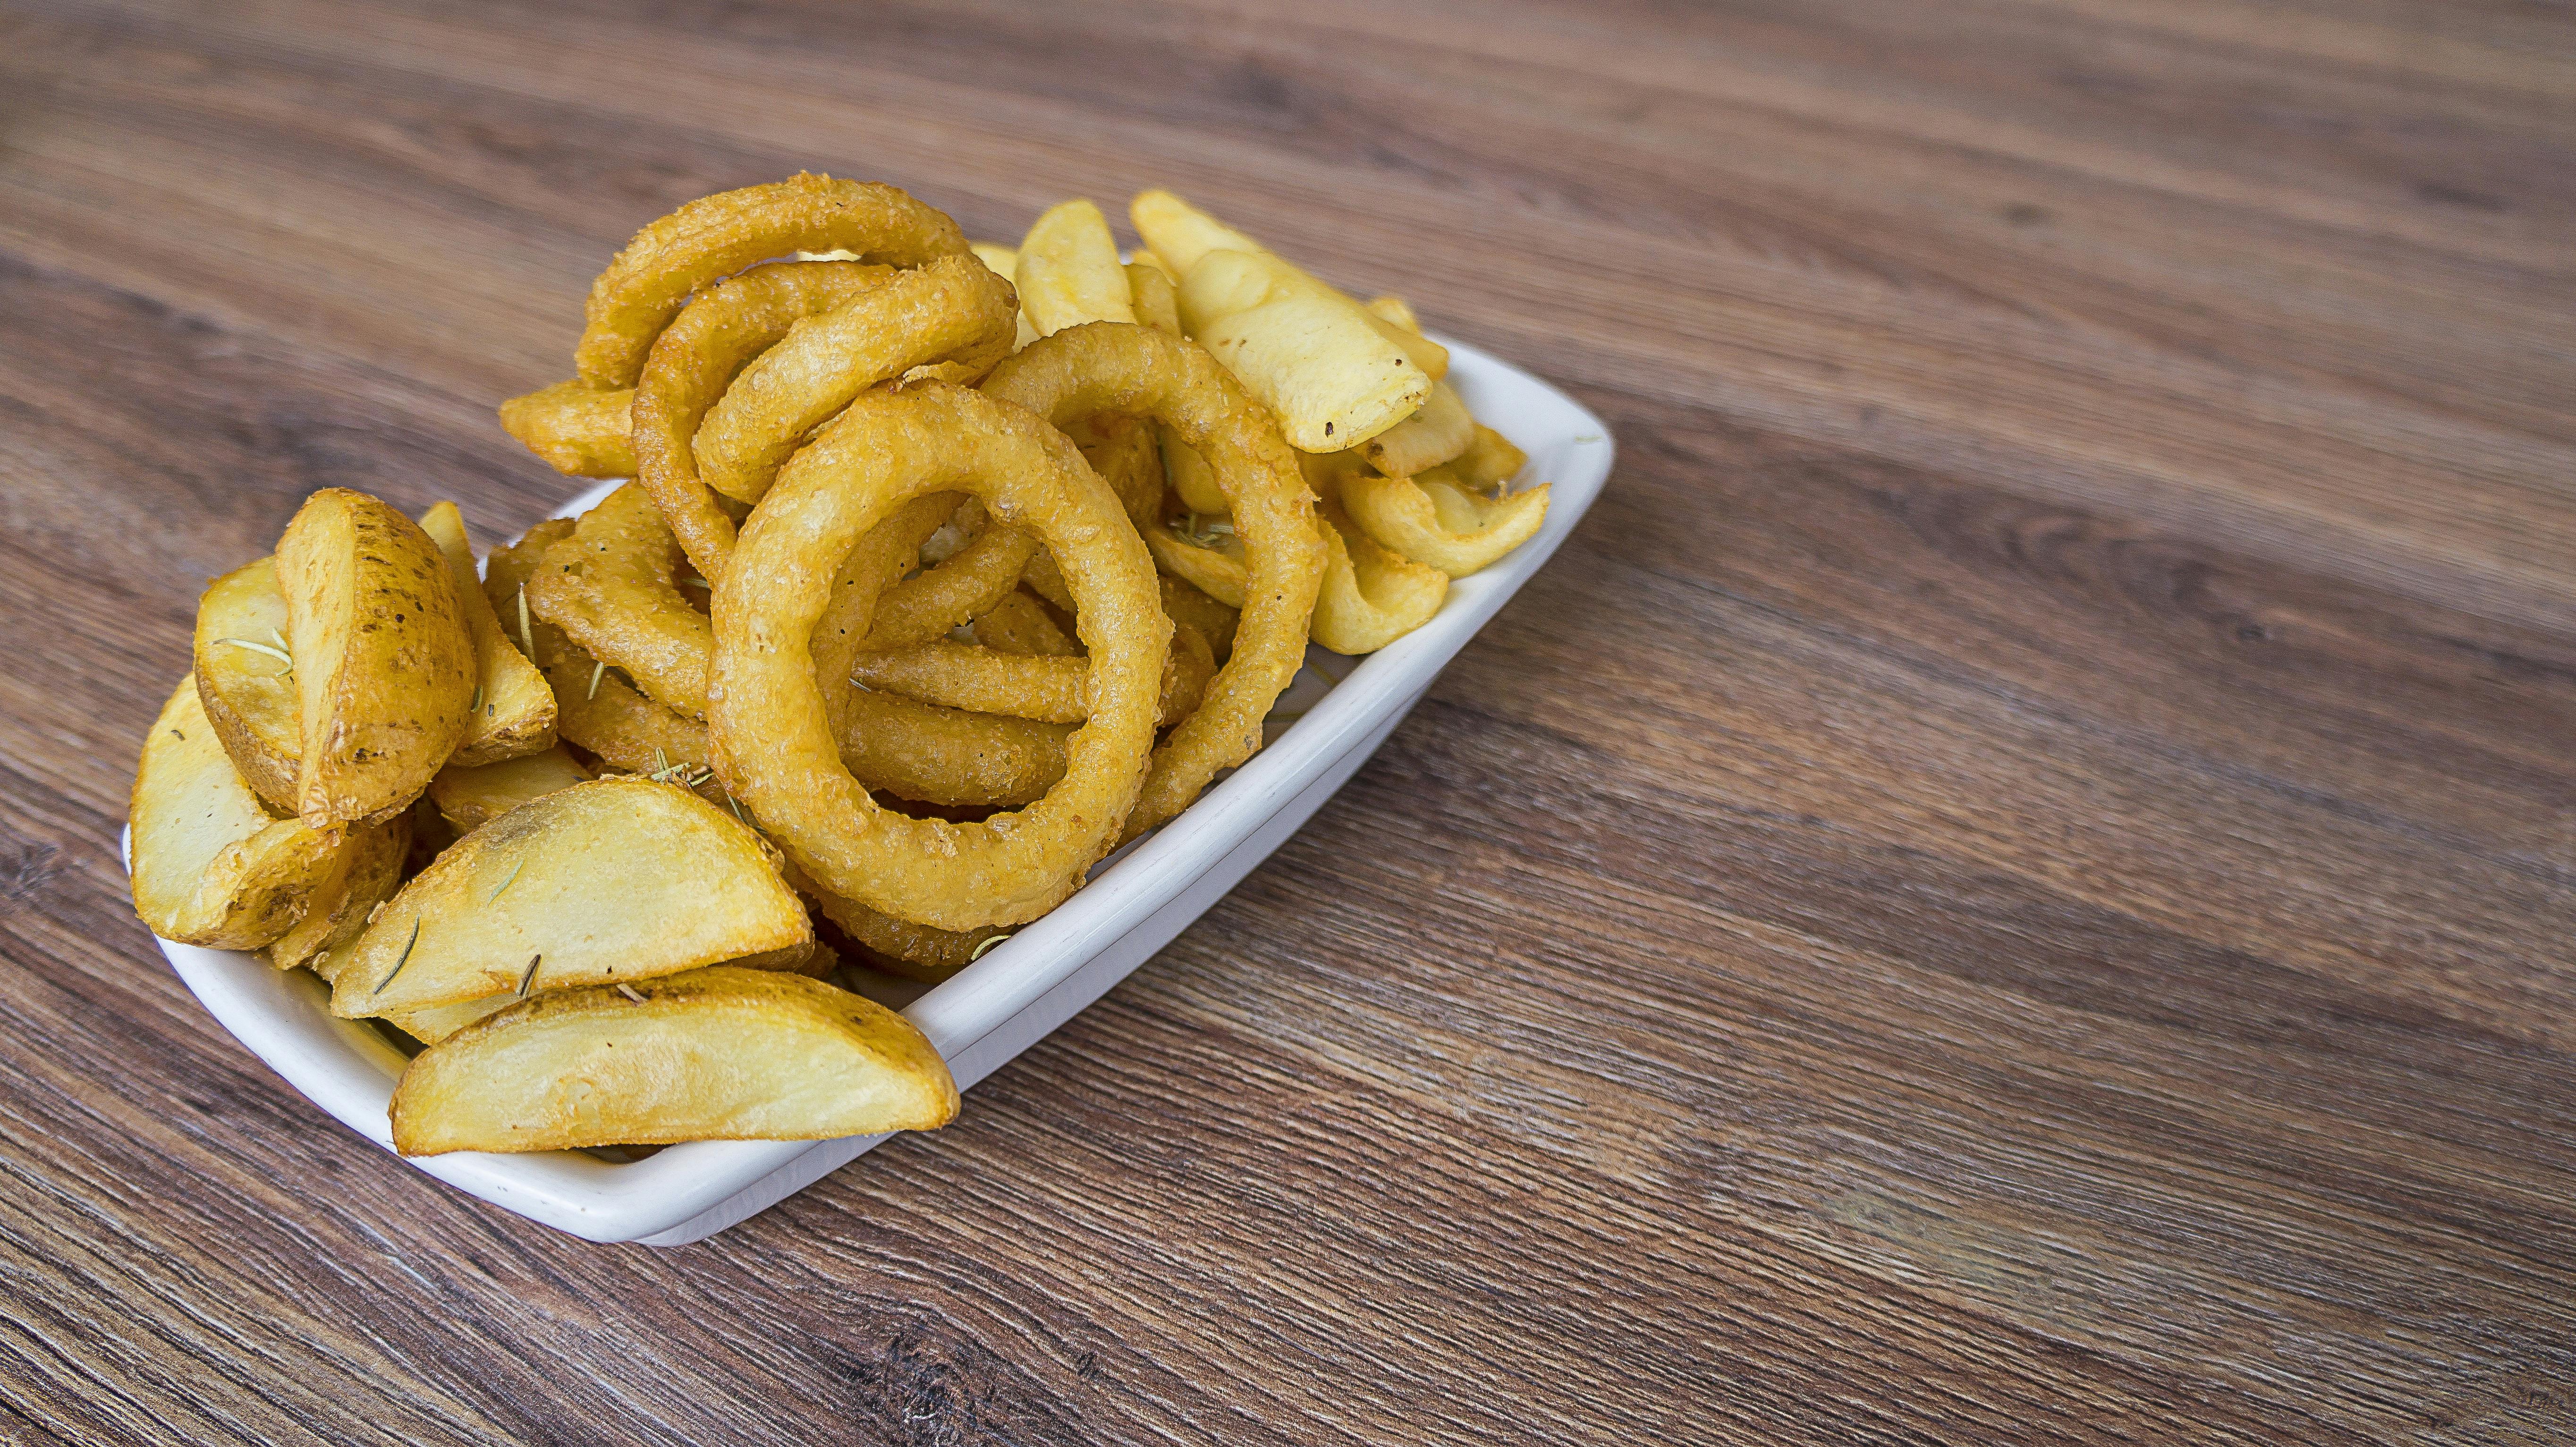 New Onion Rings from Thins - Retail World Magazine